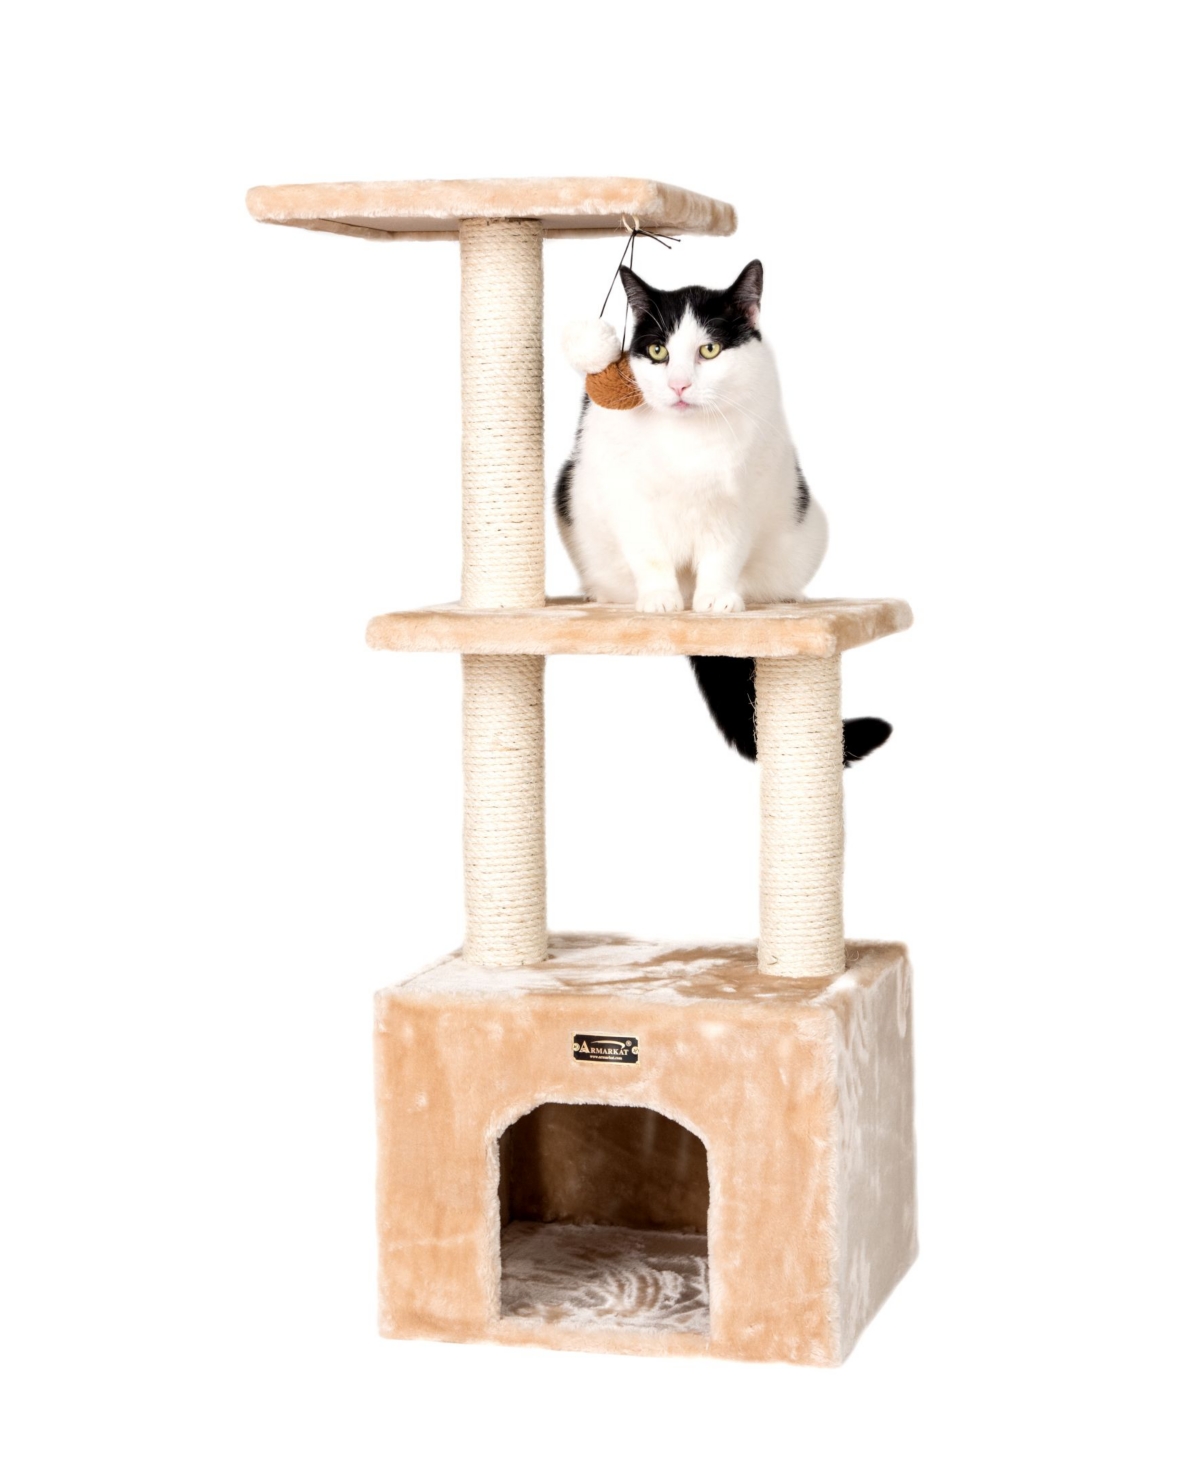 3-Tier Real Wood Cat Condo With Sisal Scratching Post - Beige